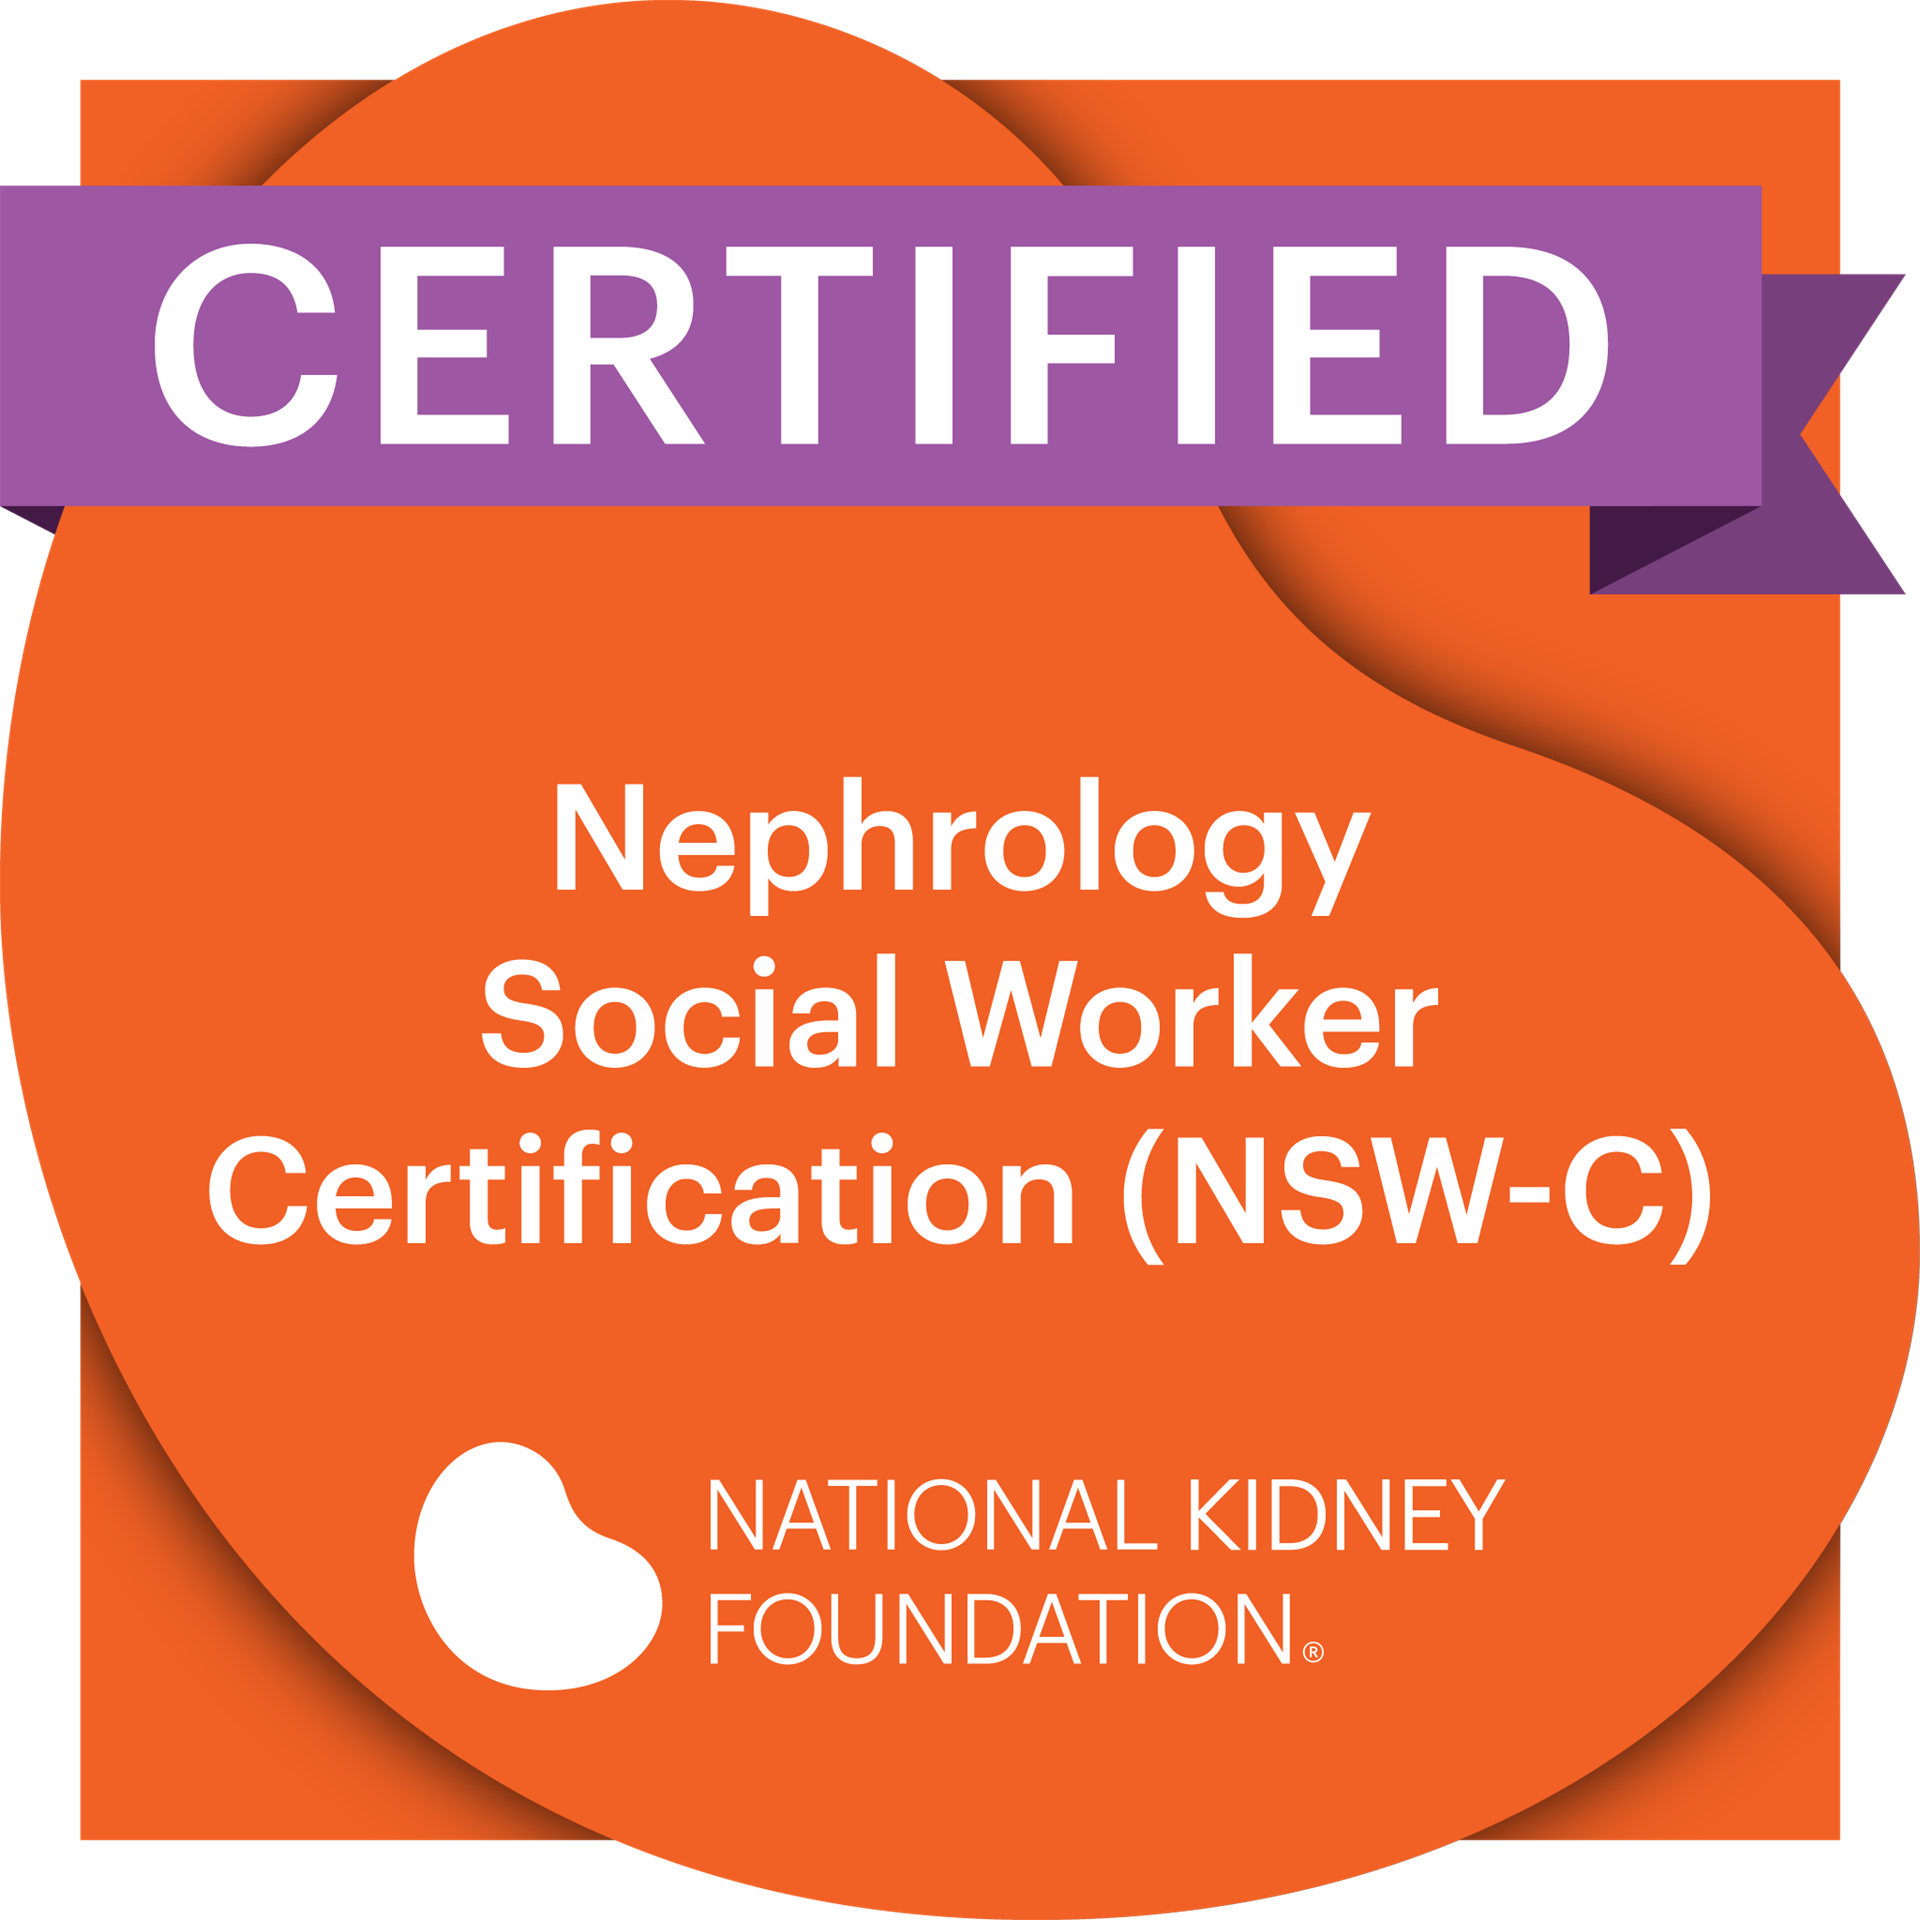 Certified Credly Badge: Nephrology Social Worker Certification (NSW-C)